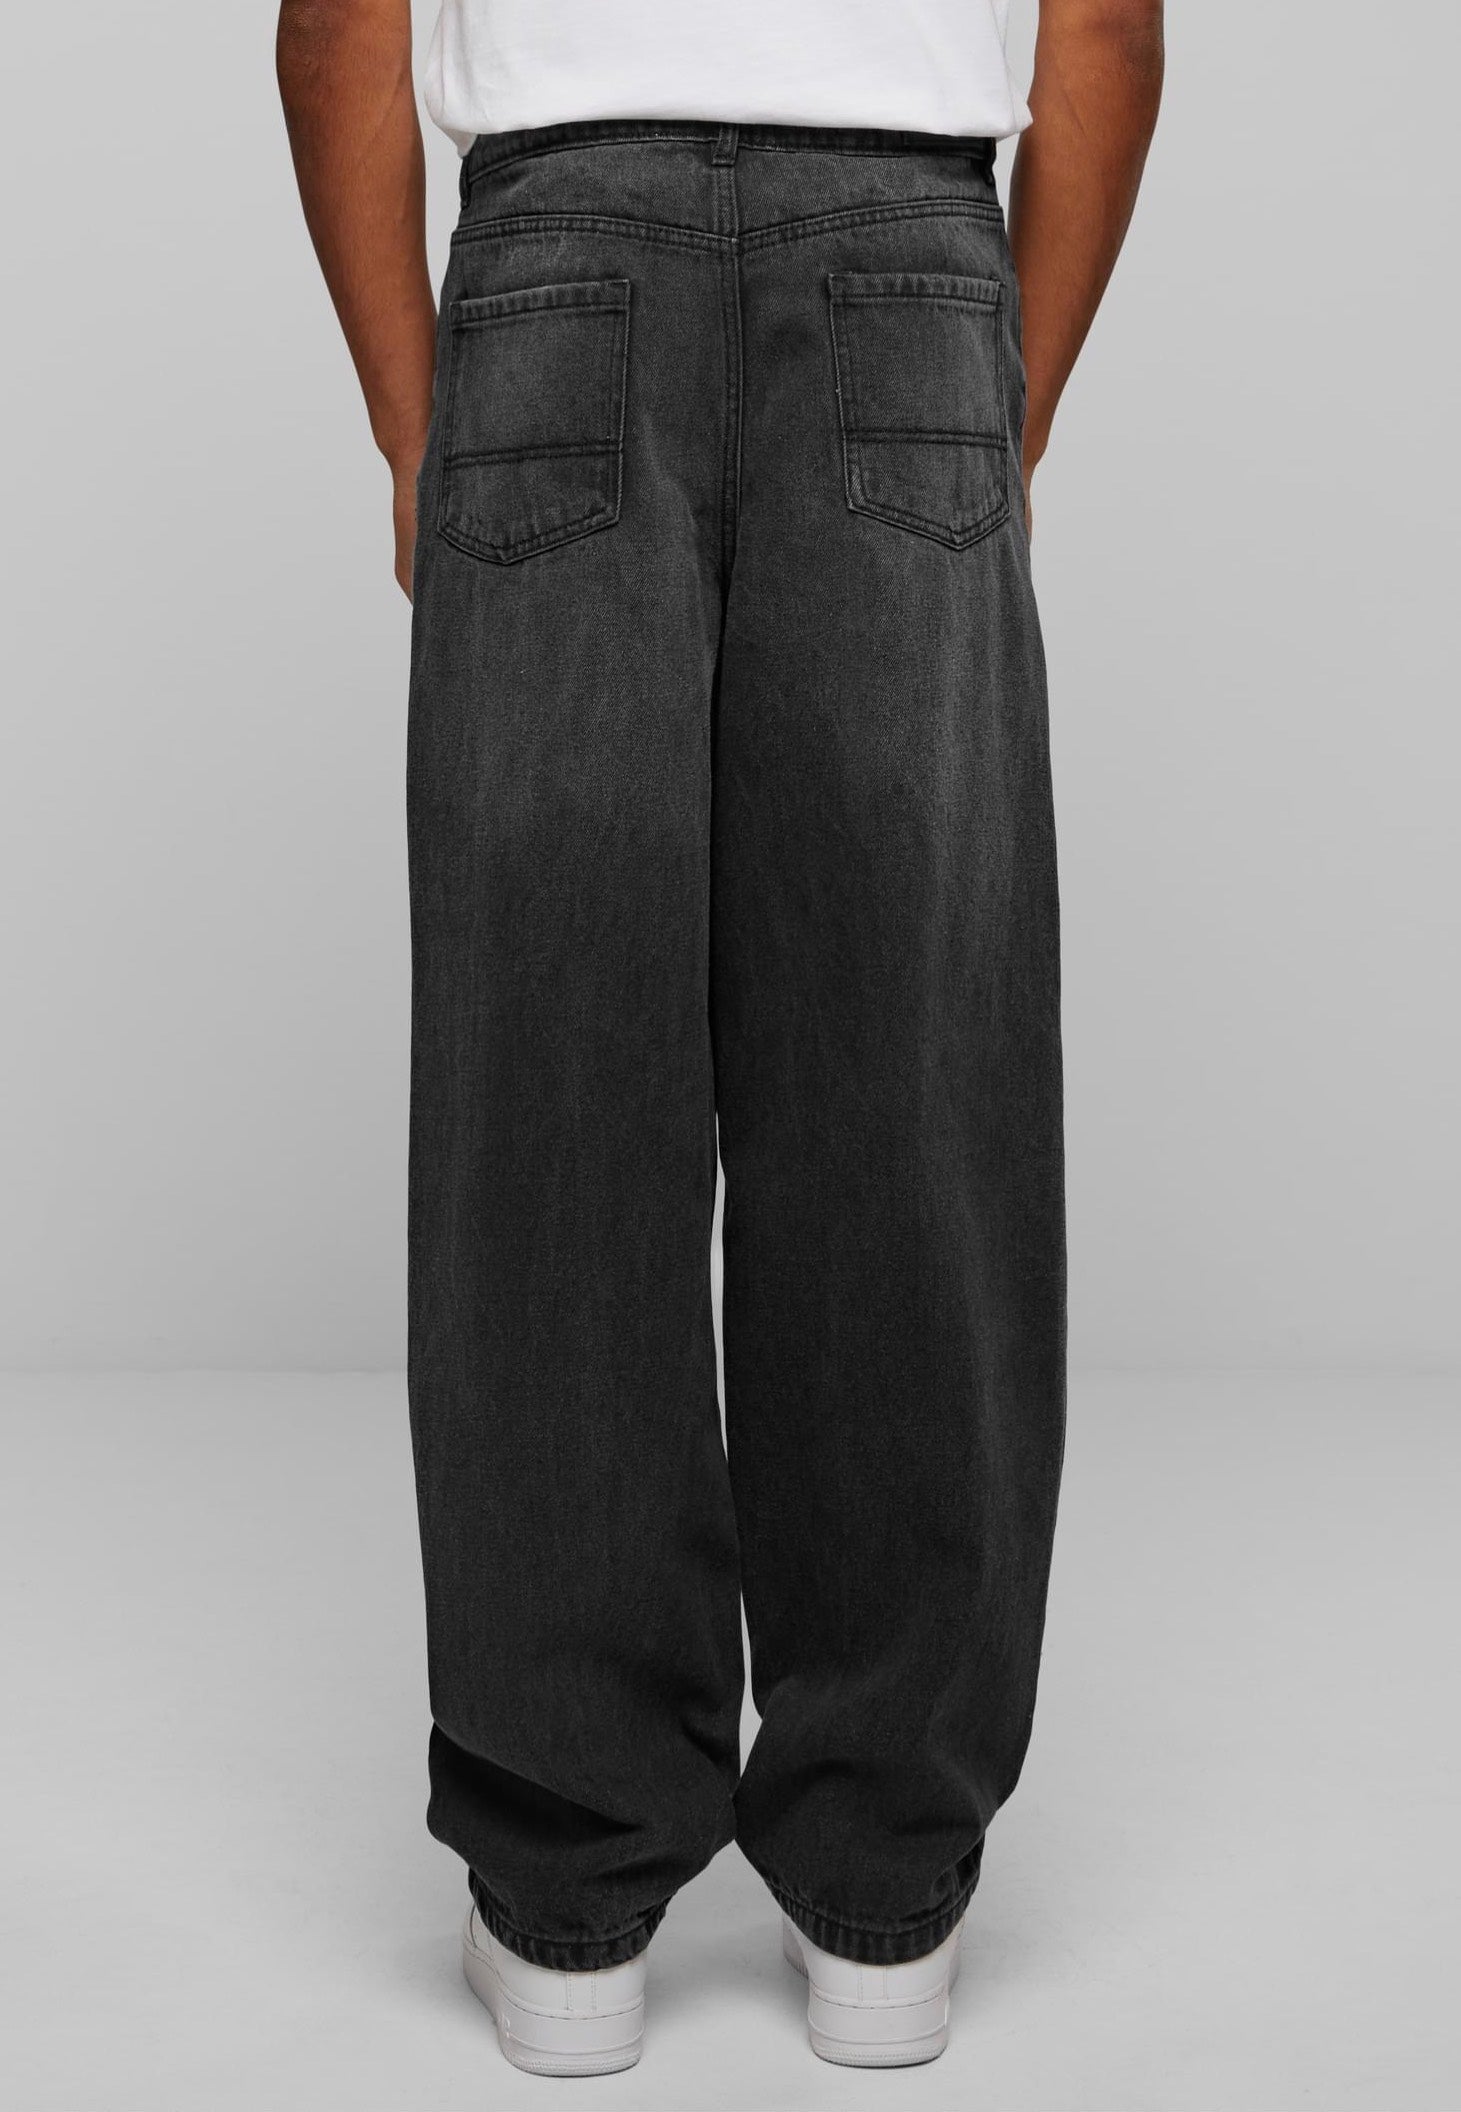 Urban Classics - Heavy Ounce Baggy Fit Black Washed - Jeans